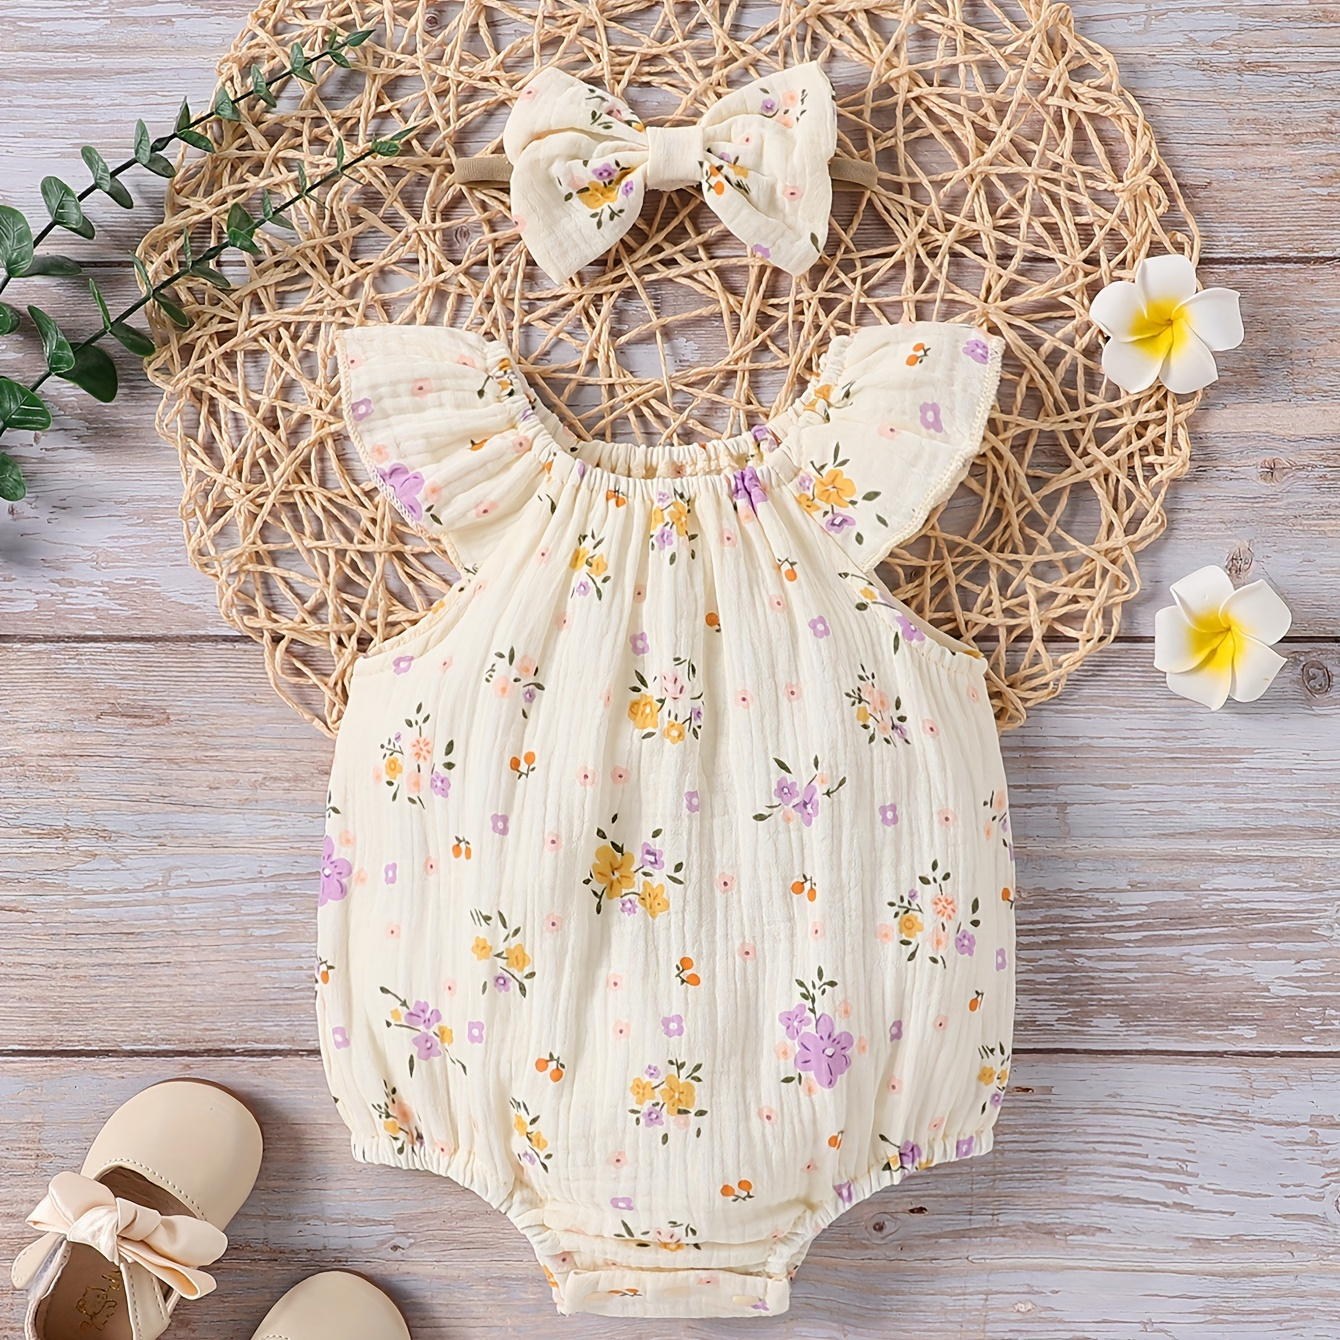 

Baby's Comfy Cotton Pastoral Style Cotton Muslin Triangle Bodysuit, Casual Floral Pattern Cap Sleeve Romper, Toddler & Infant Girl's Onesie For Summer, As Gift